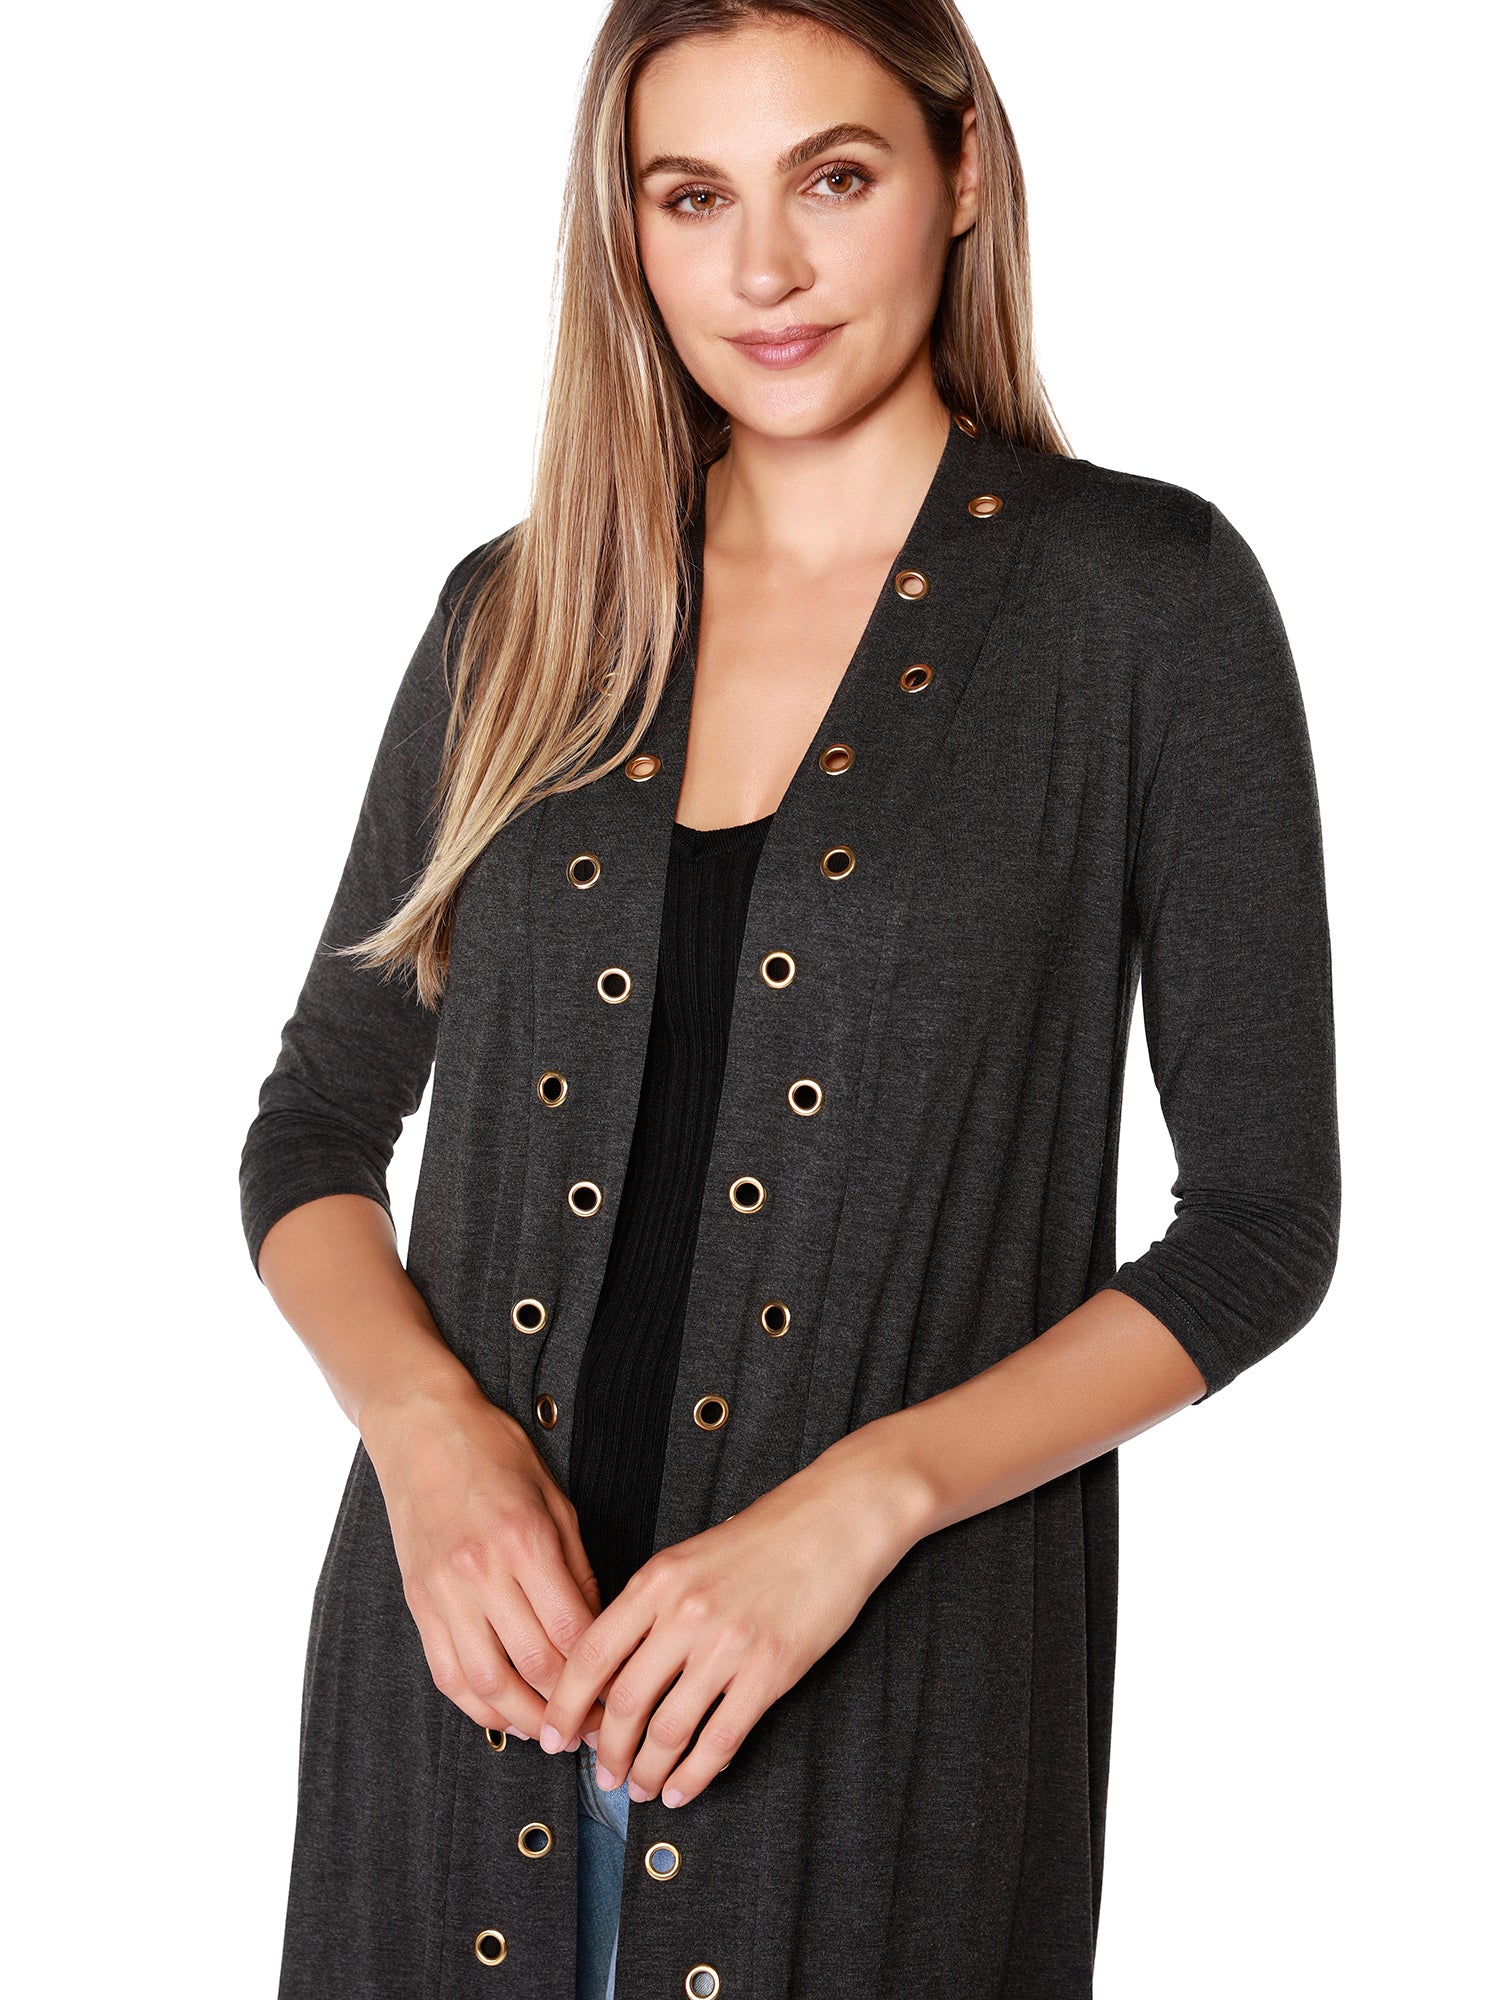 Women's Fashion Cardigan in a Soft Light Knit with 3/4 Sleeves and Grommet Trim